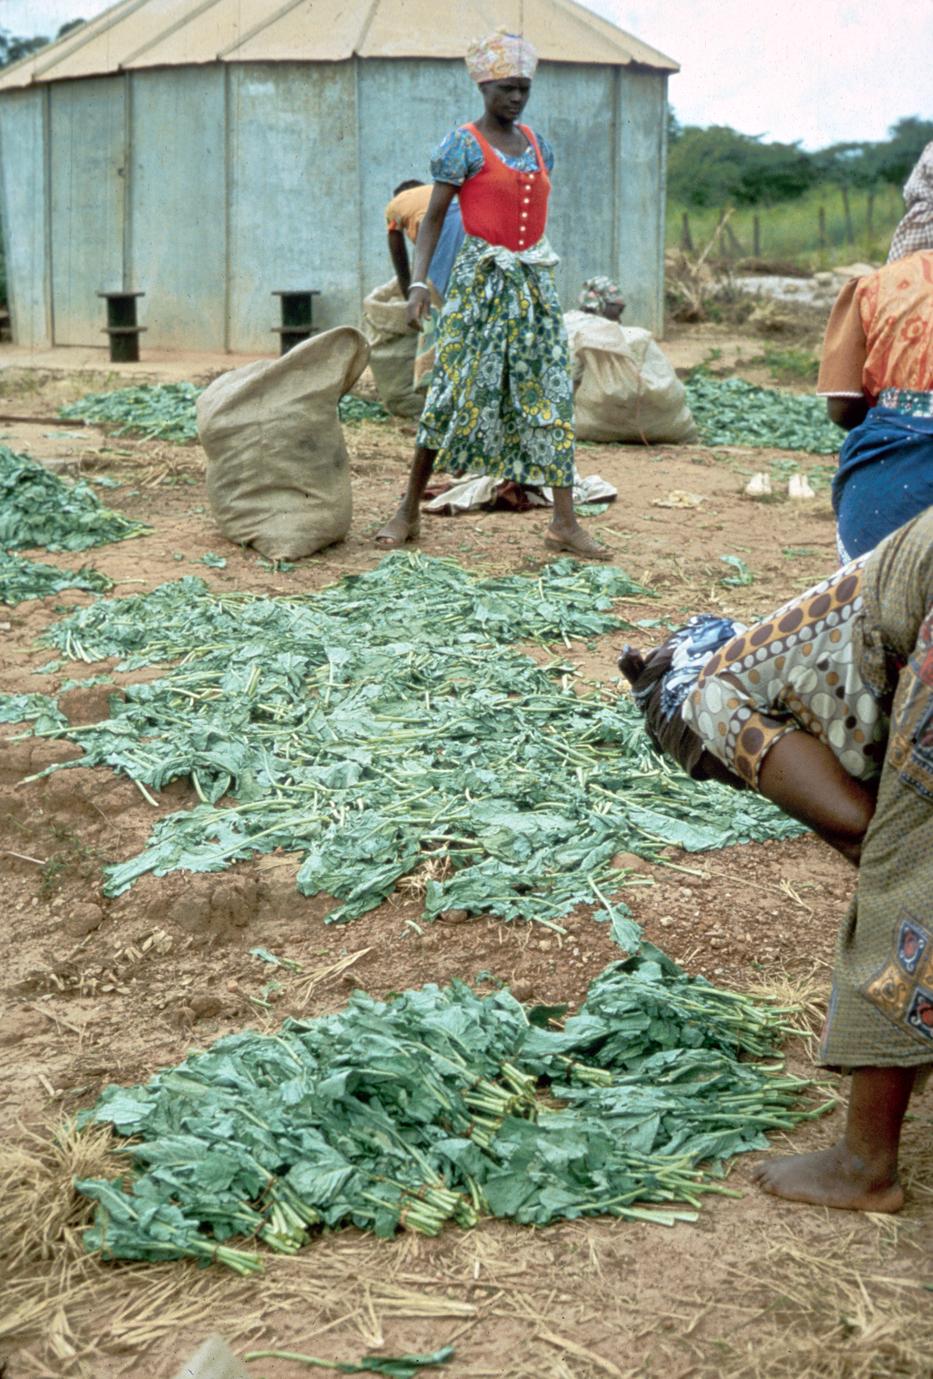 Market People Breaking Up a Sack of Rape, a Spinach-Like Leafy Vegetable